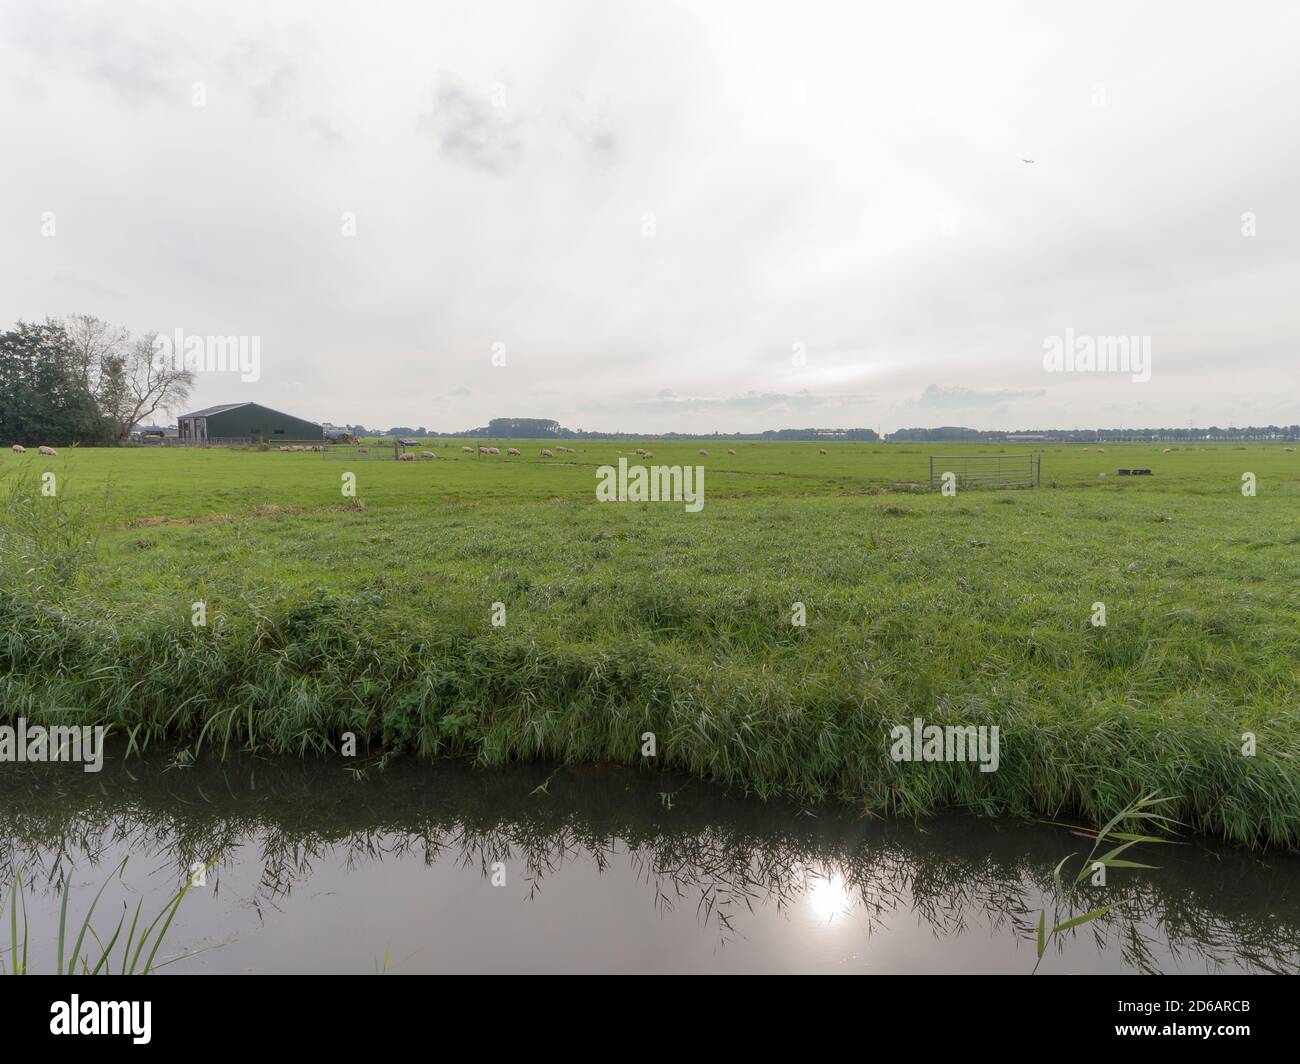 An agricultural field in Weesp, The Netherlands Stock Photo